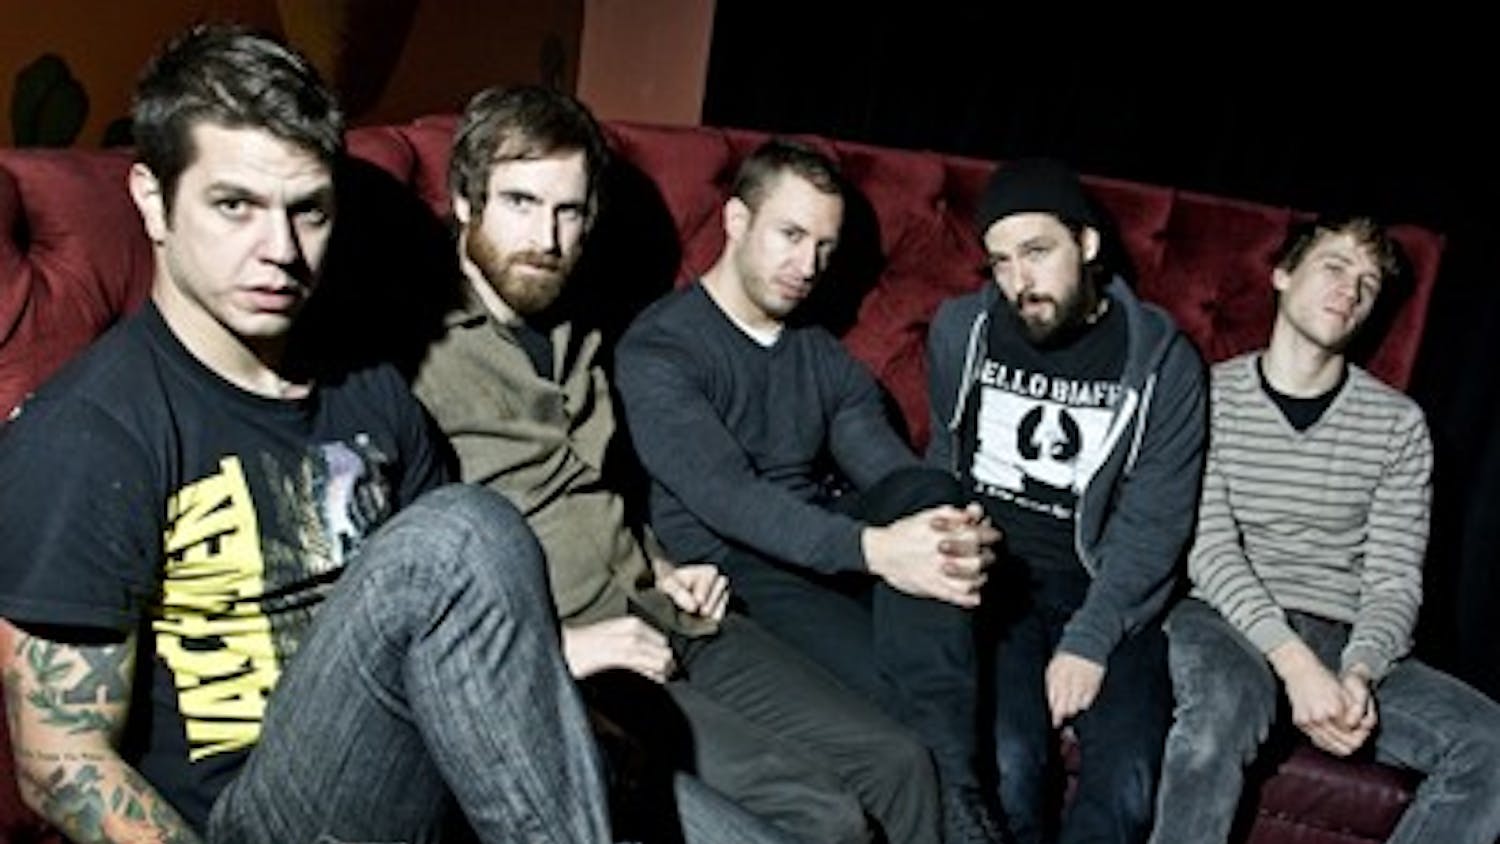 ESCAPE PLAN â€“ The Dillinger Escape Plan is one of the most notable mathcore bands, combining an eclectic style that includes post-hardcore and experimental rock. The subgenre has its origins in the District and Virginia where its popularity still grows.